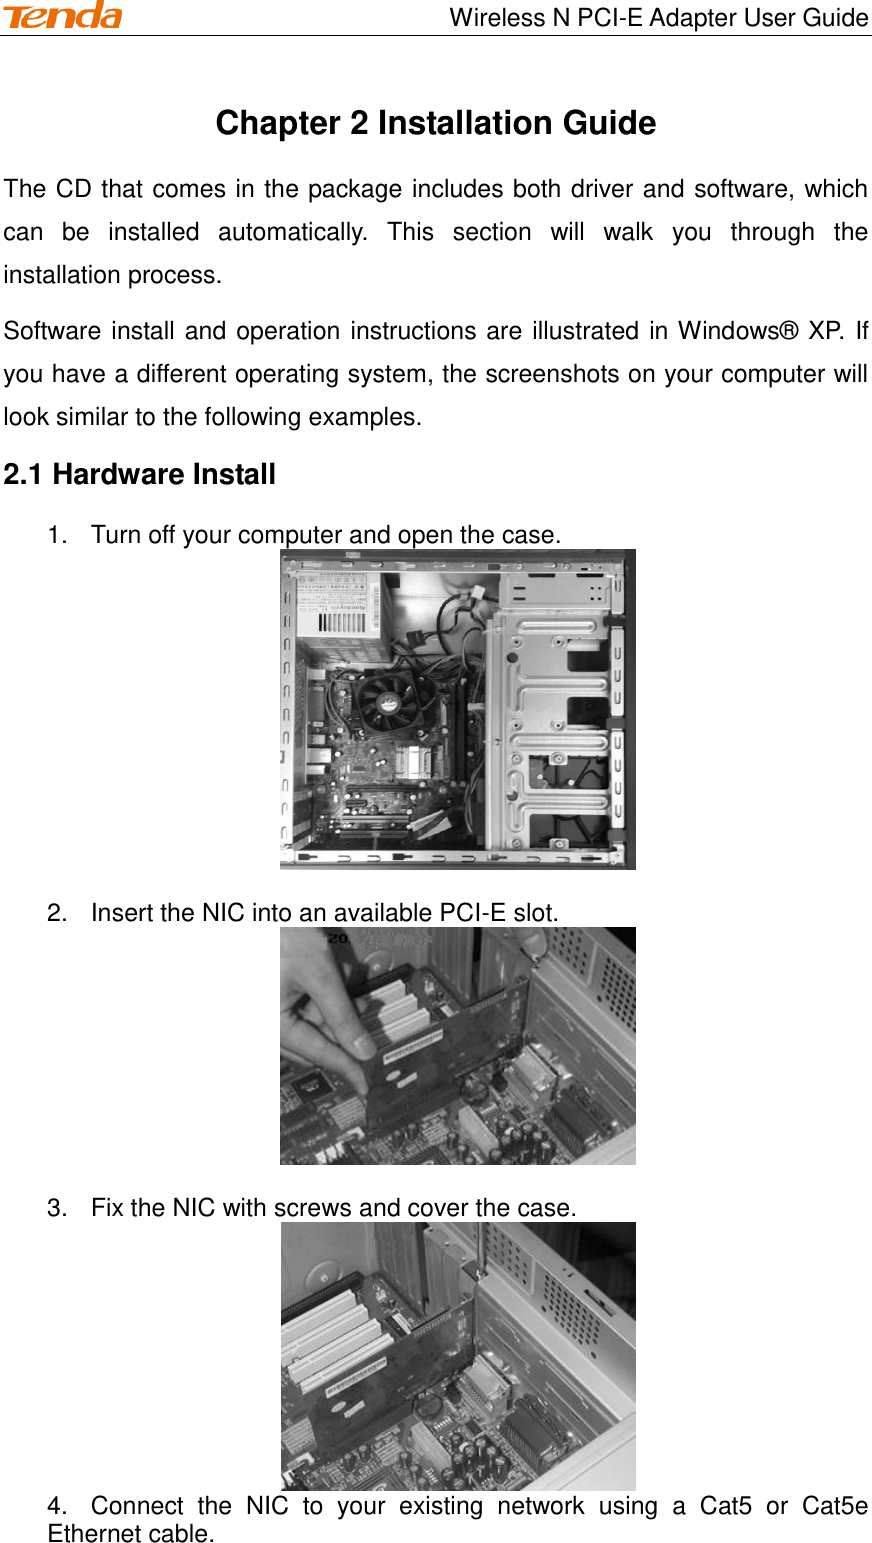                                    Wireless N PCI-E Adapter User Guide Chapter 2 Installation Guide The CD that comes in the package includes both driver and software, which can  be  installed  automatically.  This  section  will  walk  you  through  the installation process. Software install and operation instructions are illustrated in Windows® XP. If you have a different operating system, the screenshots on your computer will look similar to the following examples. 2.1 Hardware Install 1.  Turn off your computer and open the case.   2.  Insert the NIC into an available PCI-E slot.     3.  Fix the NIC with screws and cover the case.  4.  Connect  the  NIC  to  your  existing  network  using  a  Cat5  or  Cat5e Ethernet cable. 